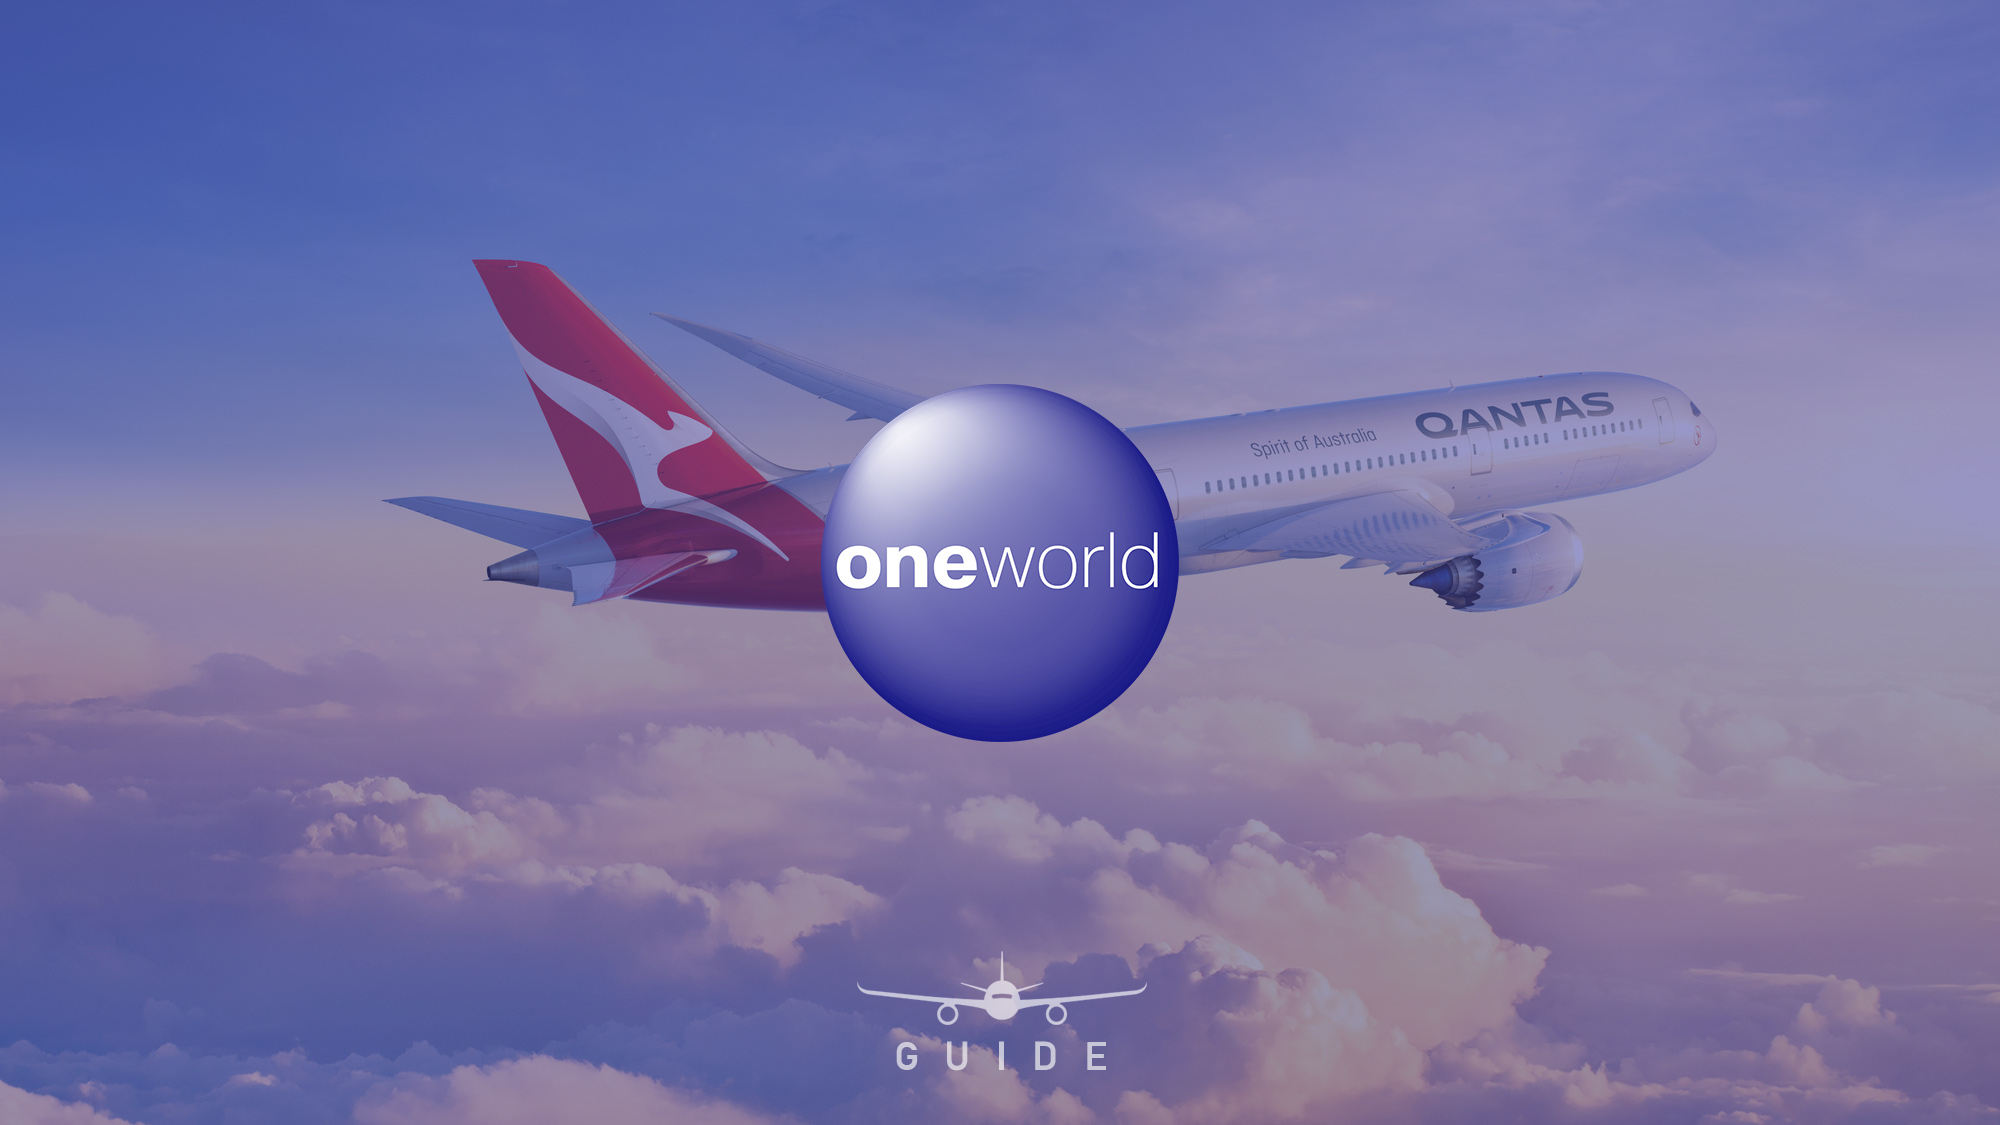 Everything you need to know about the oneworld alliance